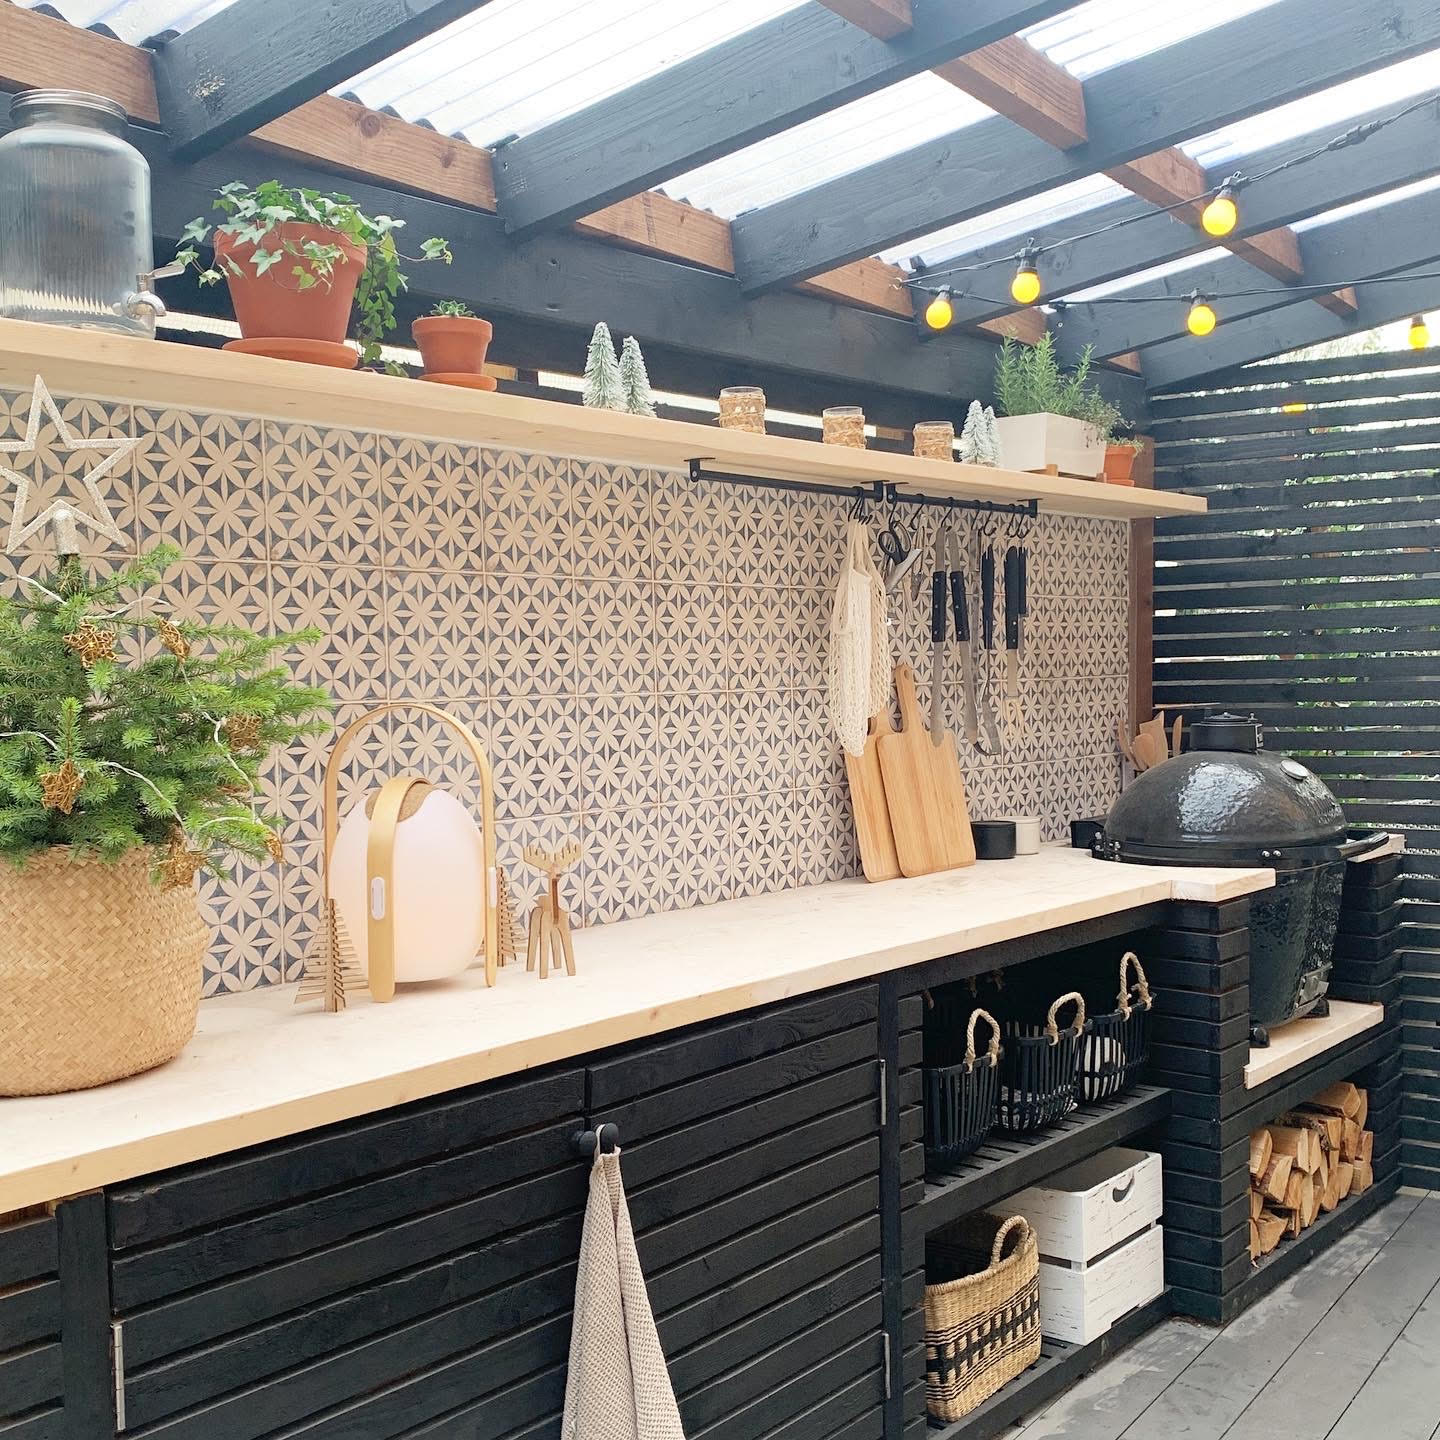 25 Outdoor Kitchen Ideas With Photos of Inspiring Spaces ...